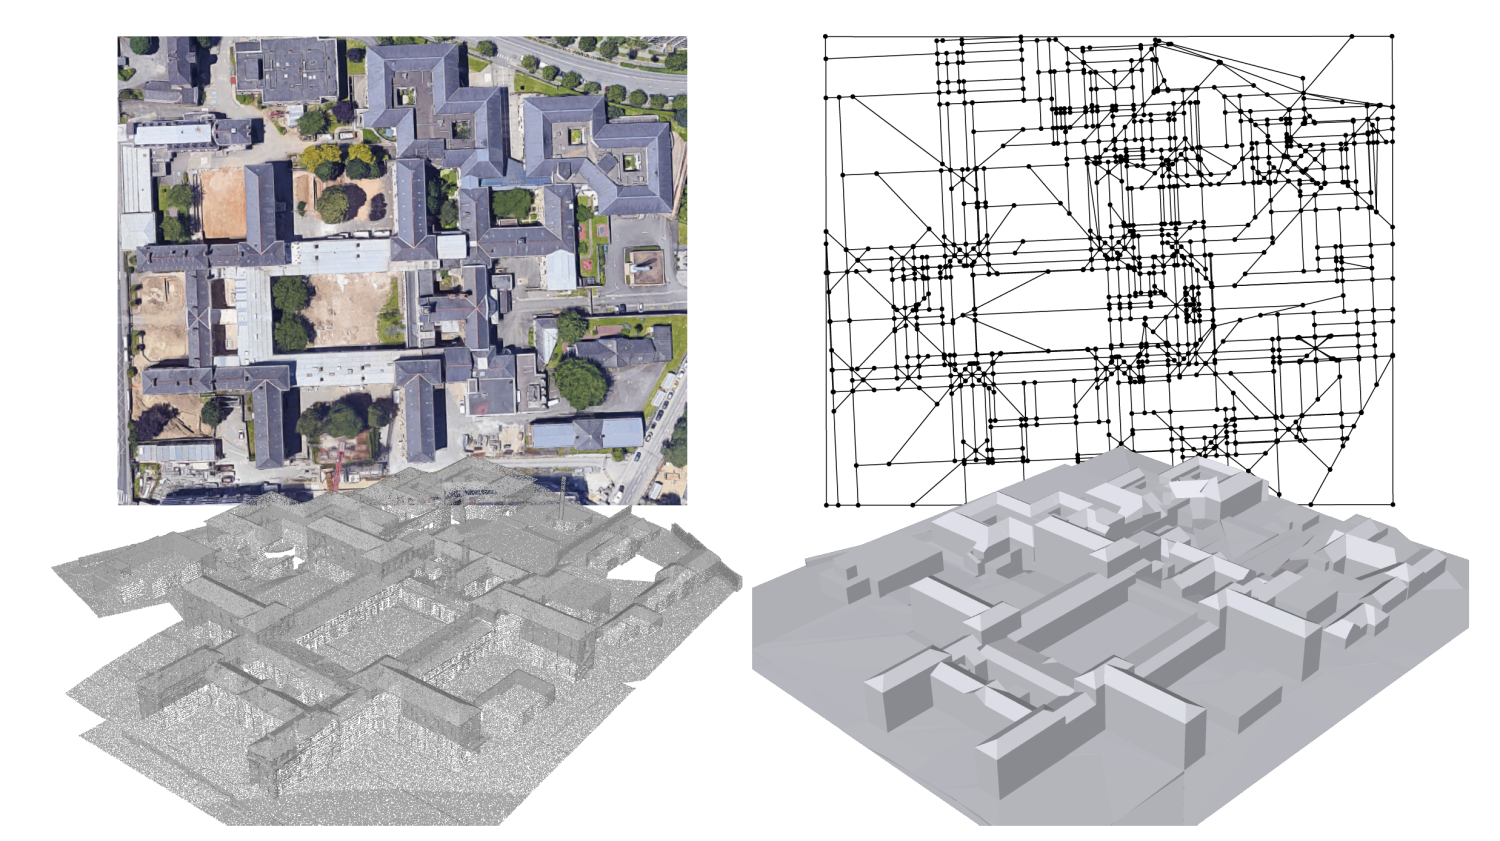 Results on a large regular building complex. Our 3D output model (bottom right) preserves the orthogonality existing between facade and rooftop components. Note how the planimetric partition (top right) aligns well with the aerial image (top left).